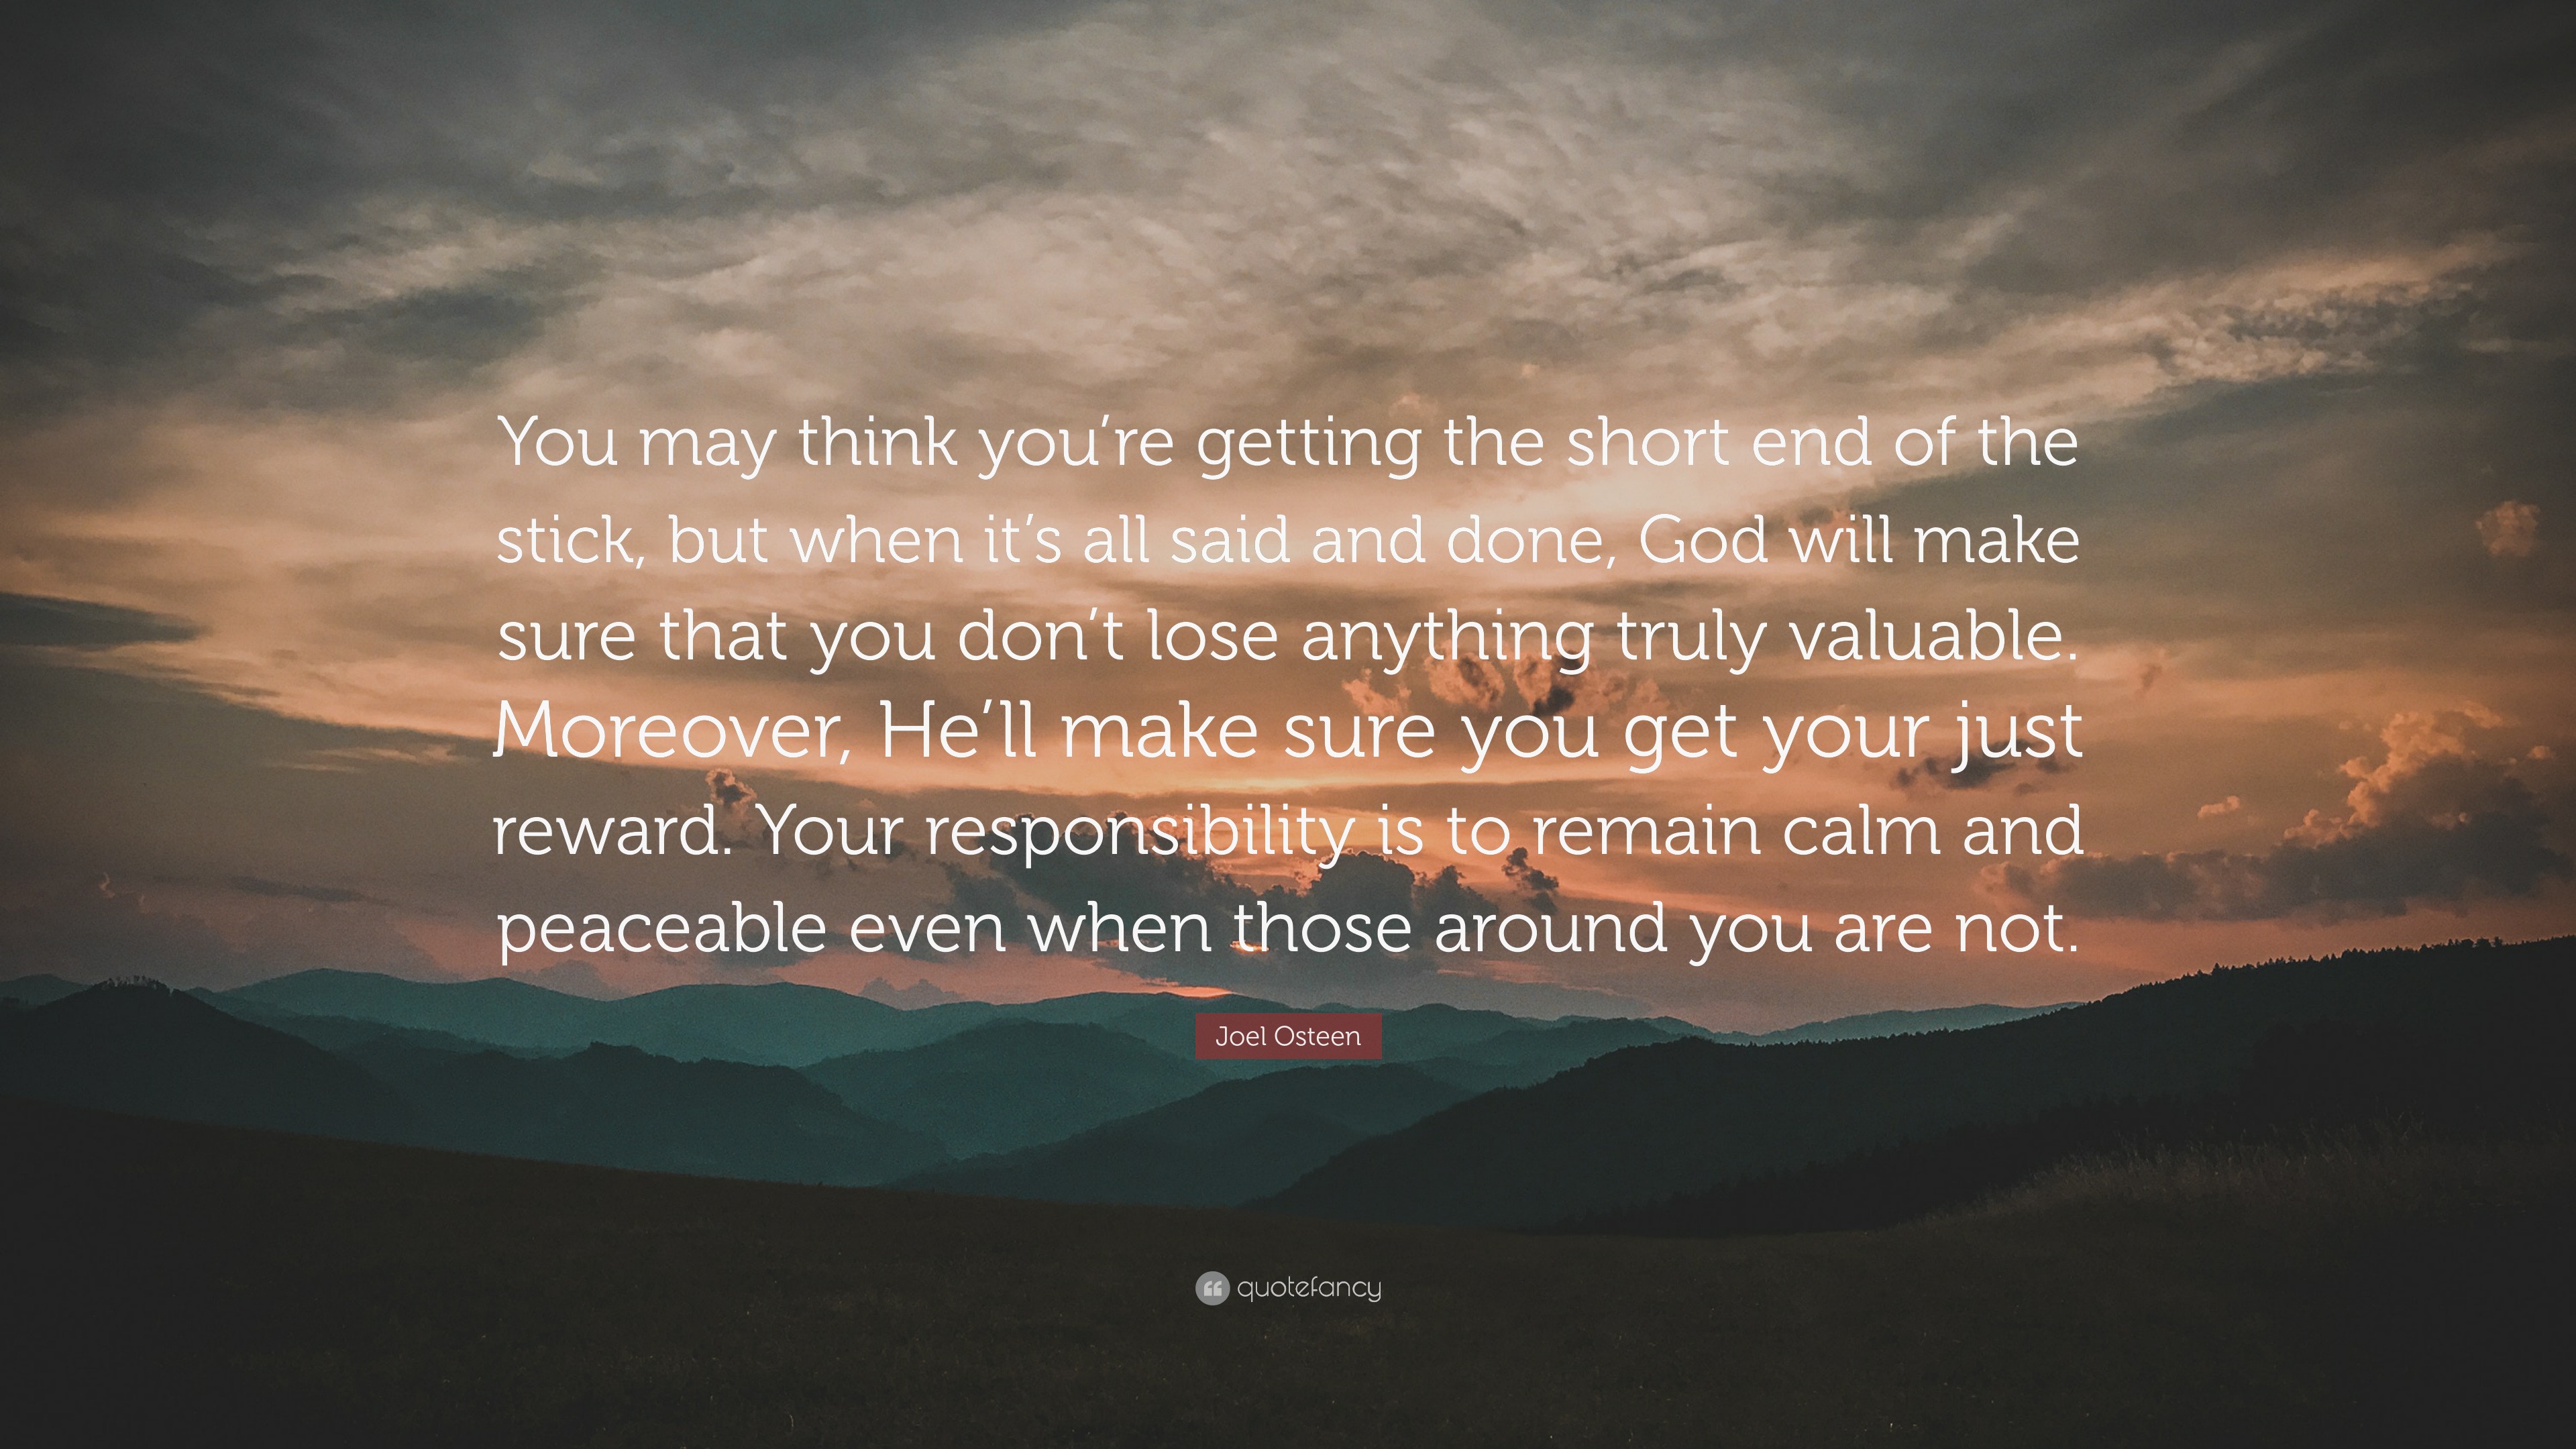 Joel Osteen Quote: “You may think you’re getting the short end of the ...